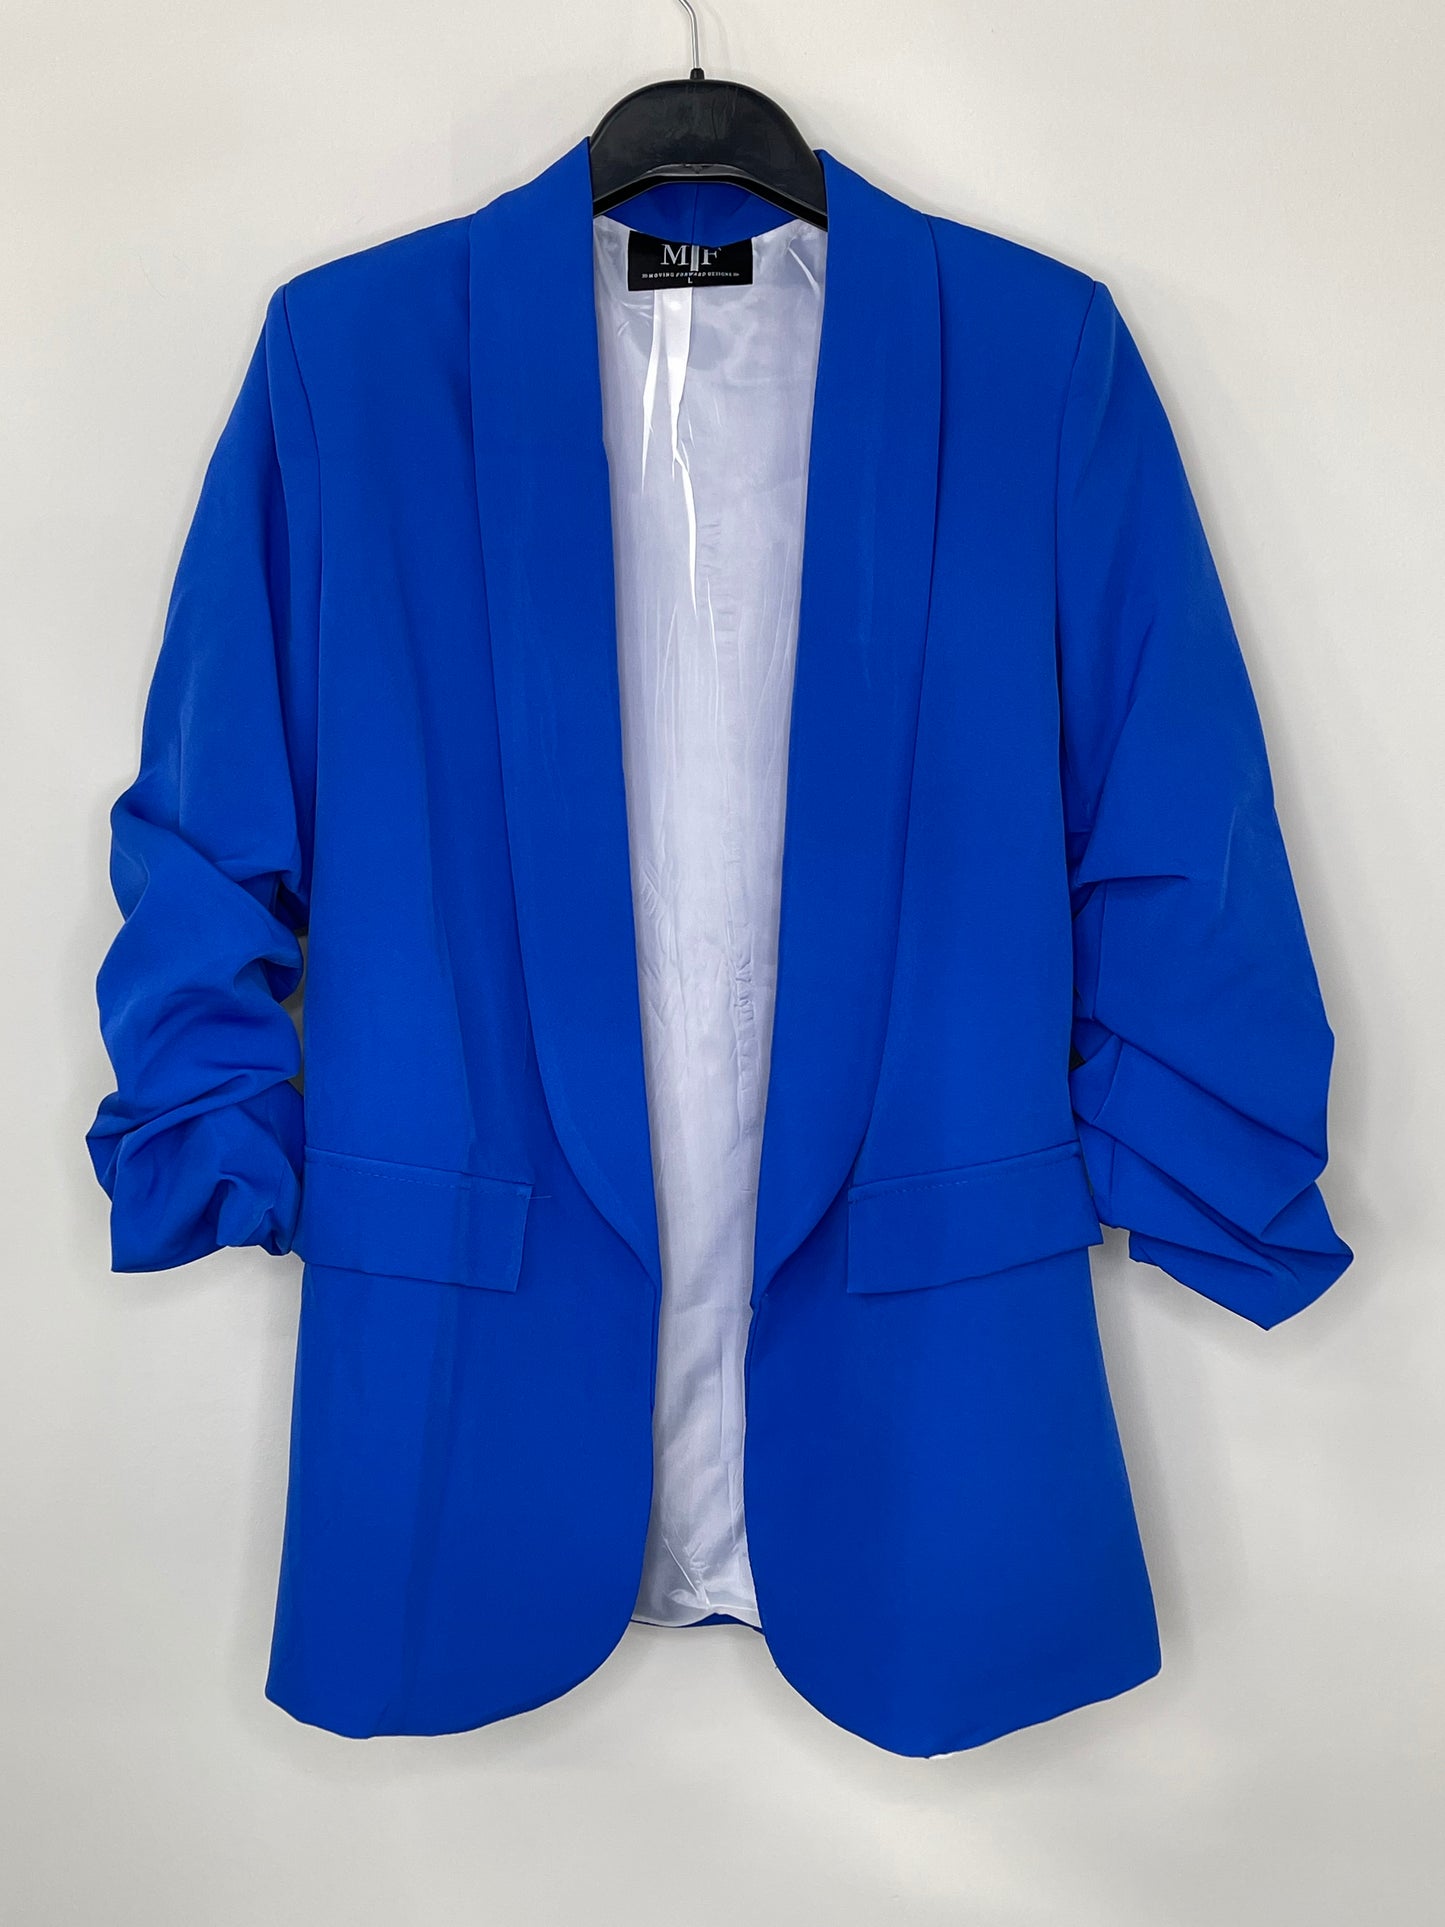 SMALL, MEDIUM & LARGE Royal Blue Ruched Blazer with Soccer Mom